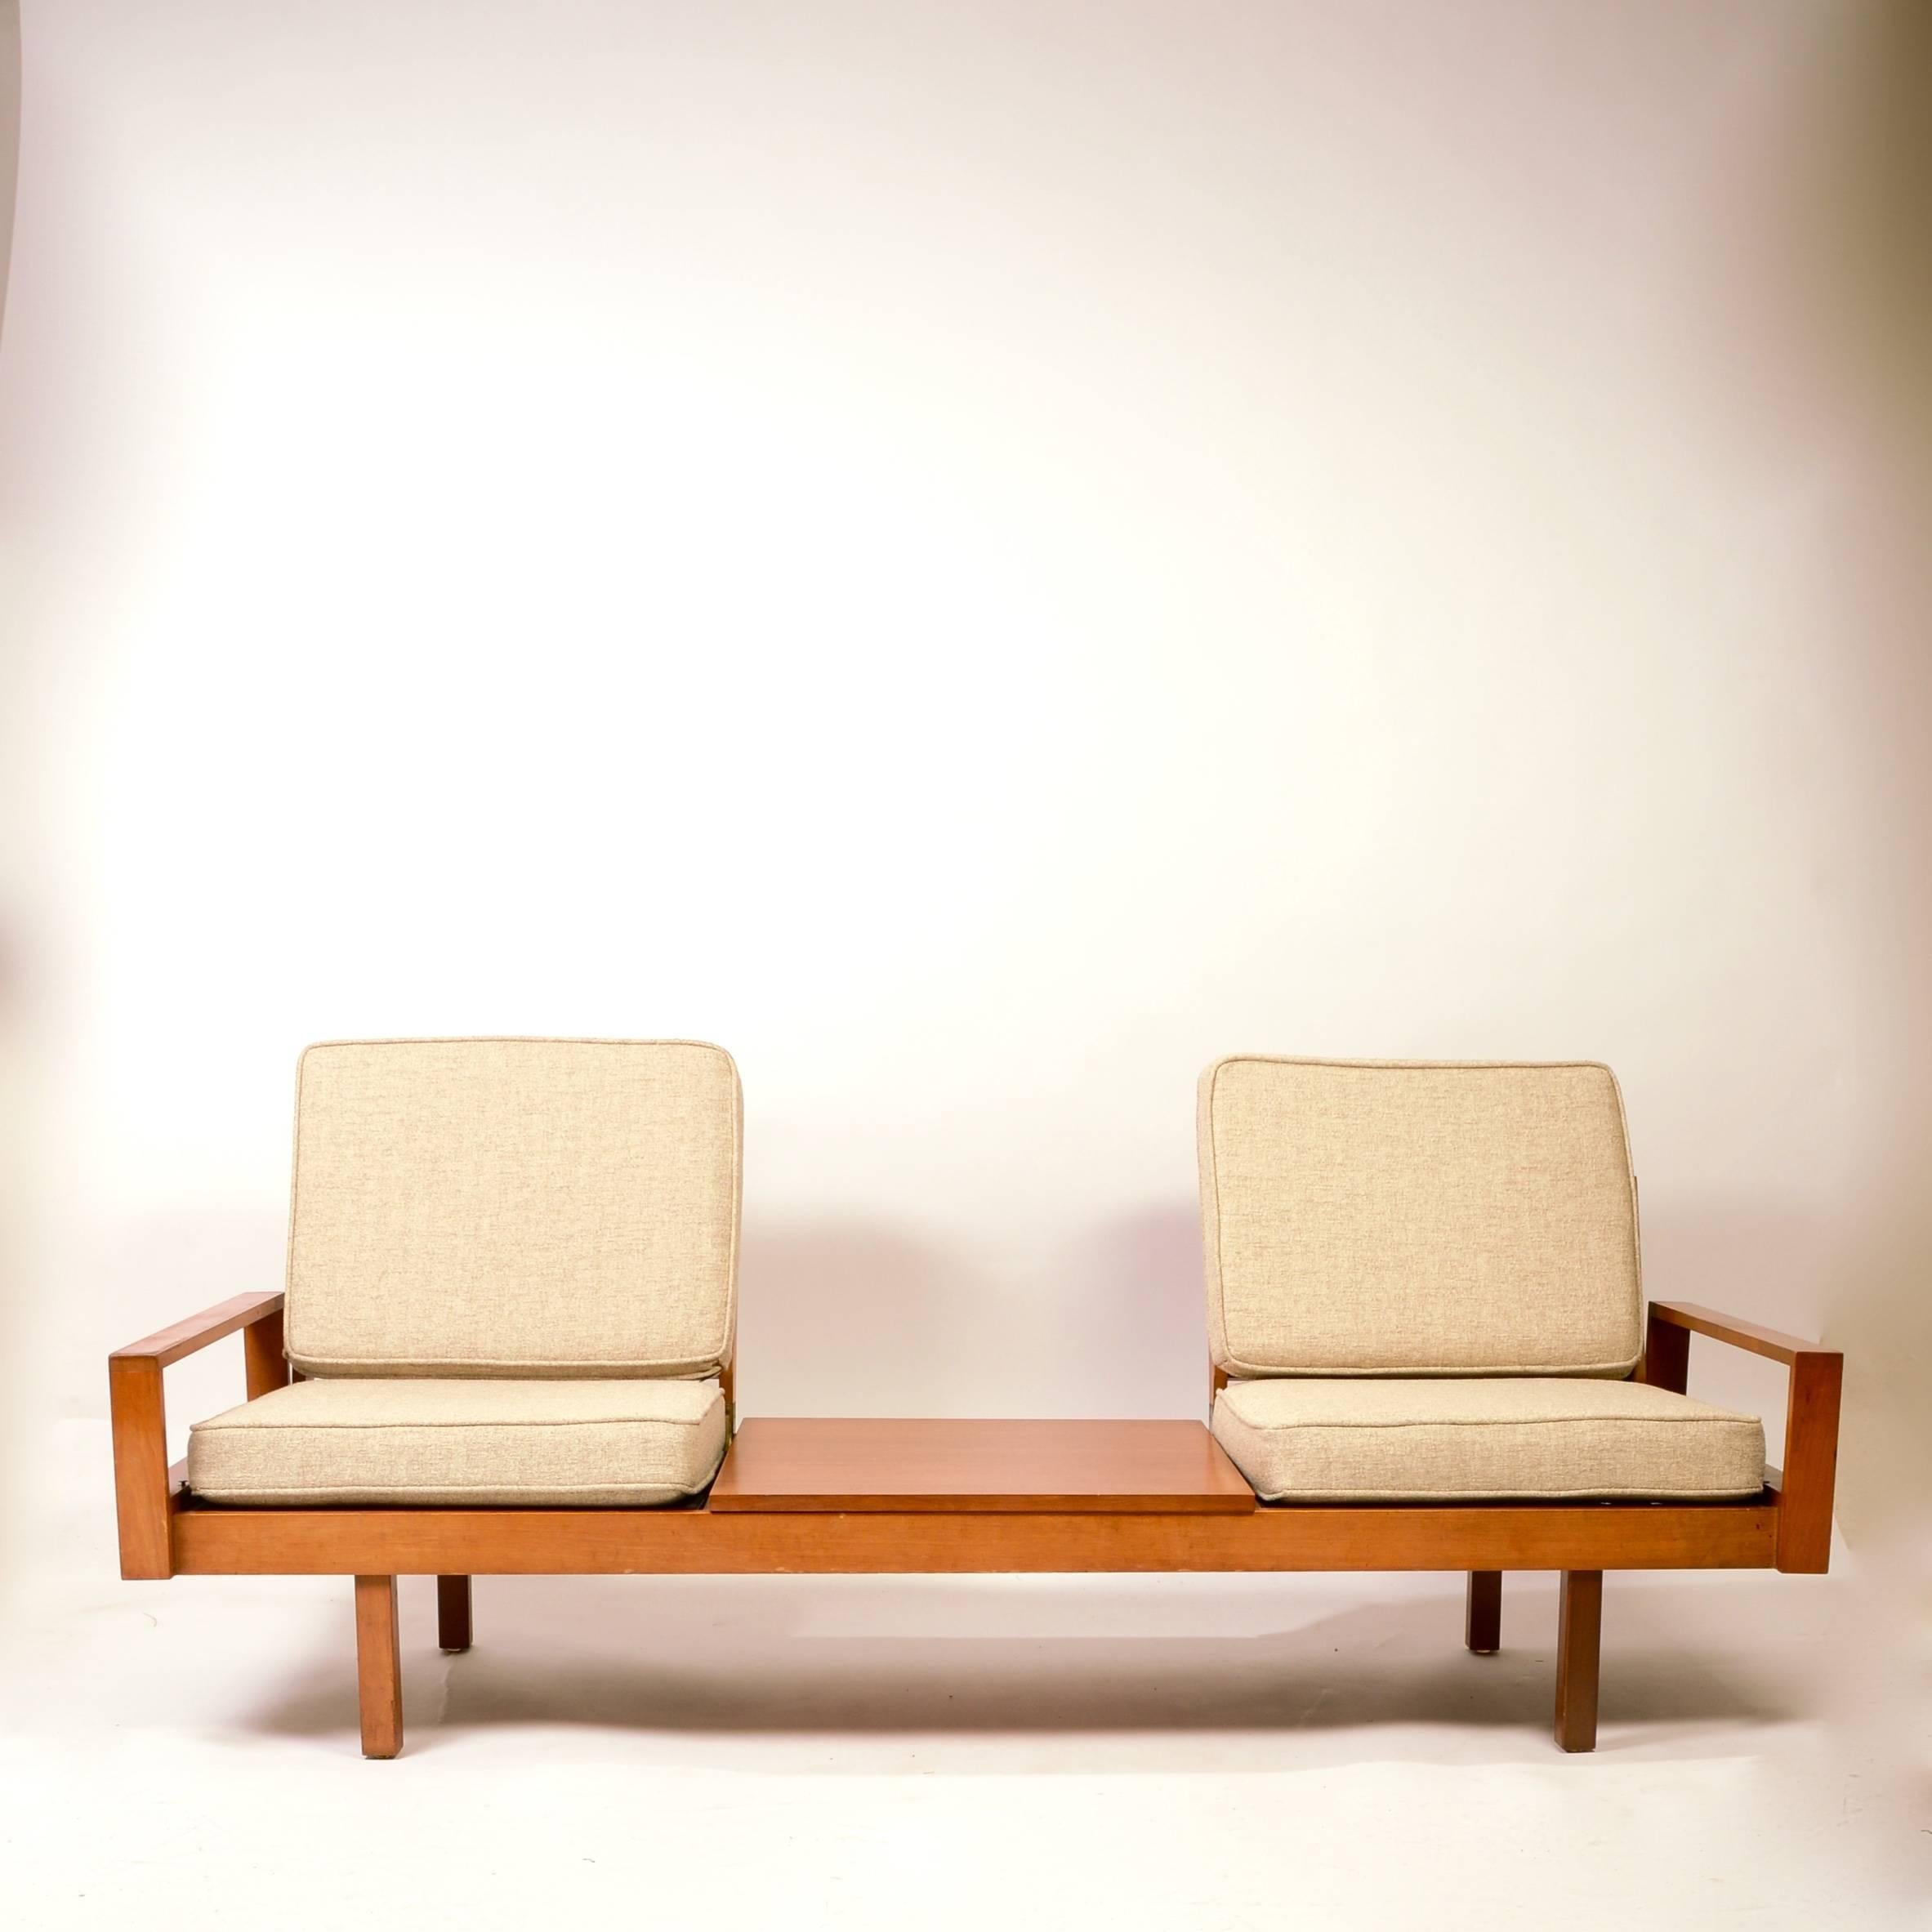 Upholstery Chair by Martin Borenstein for the Brown & Saltman Modular Living Room System